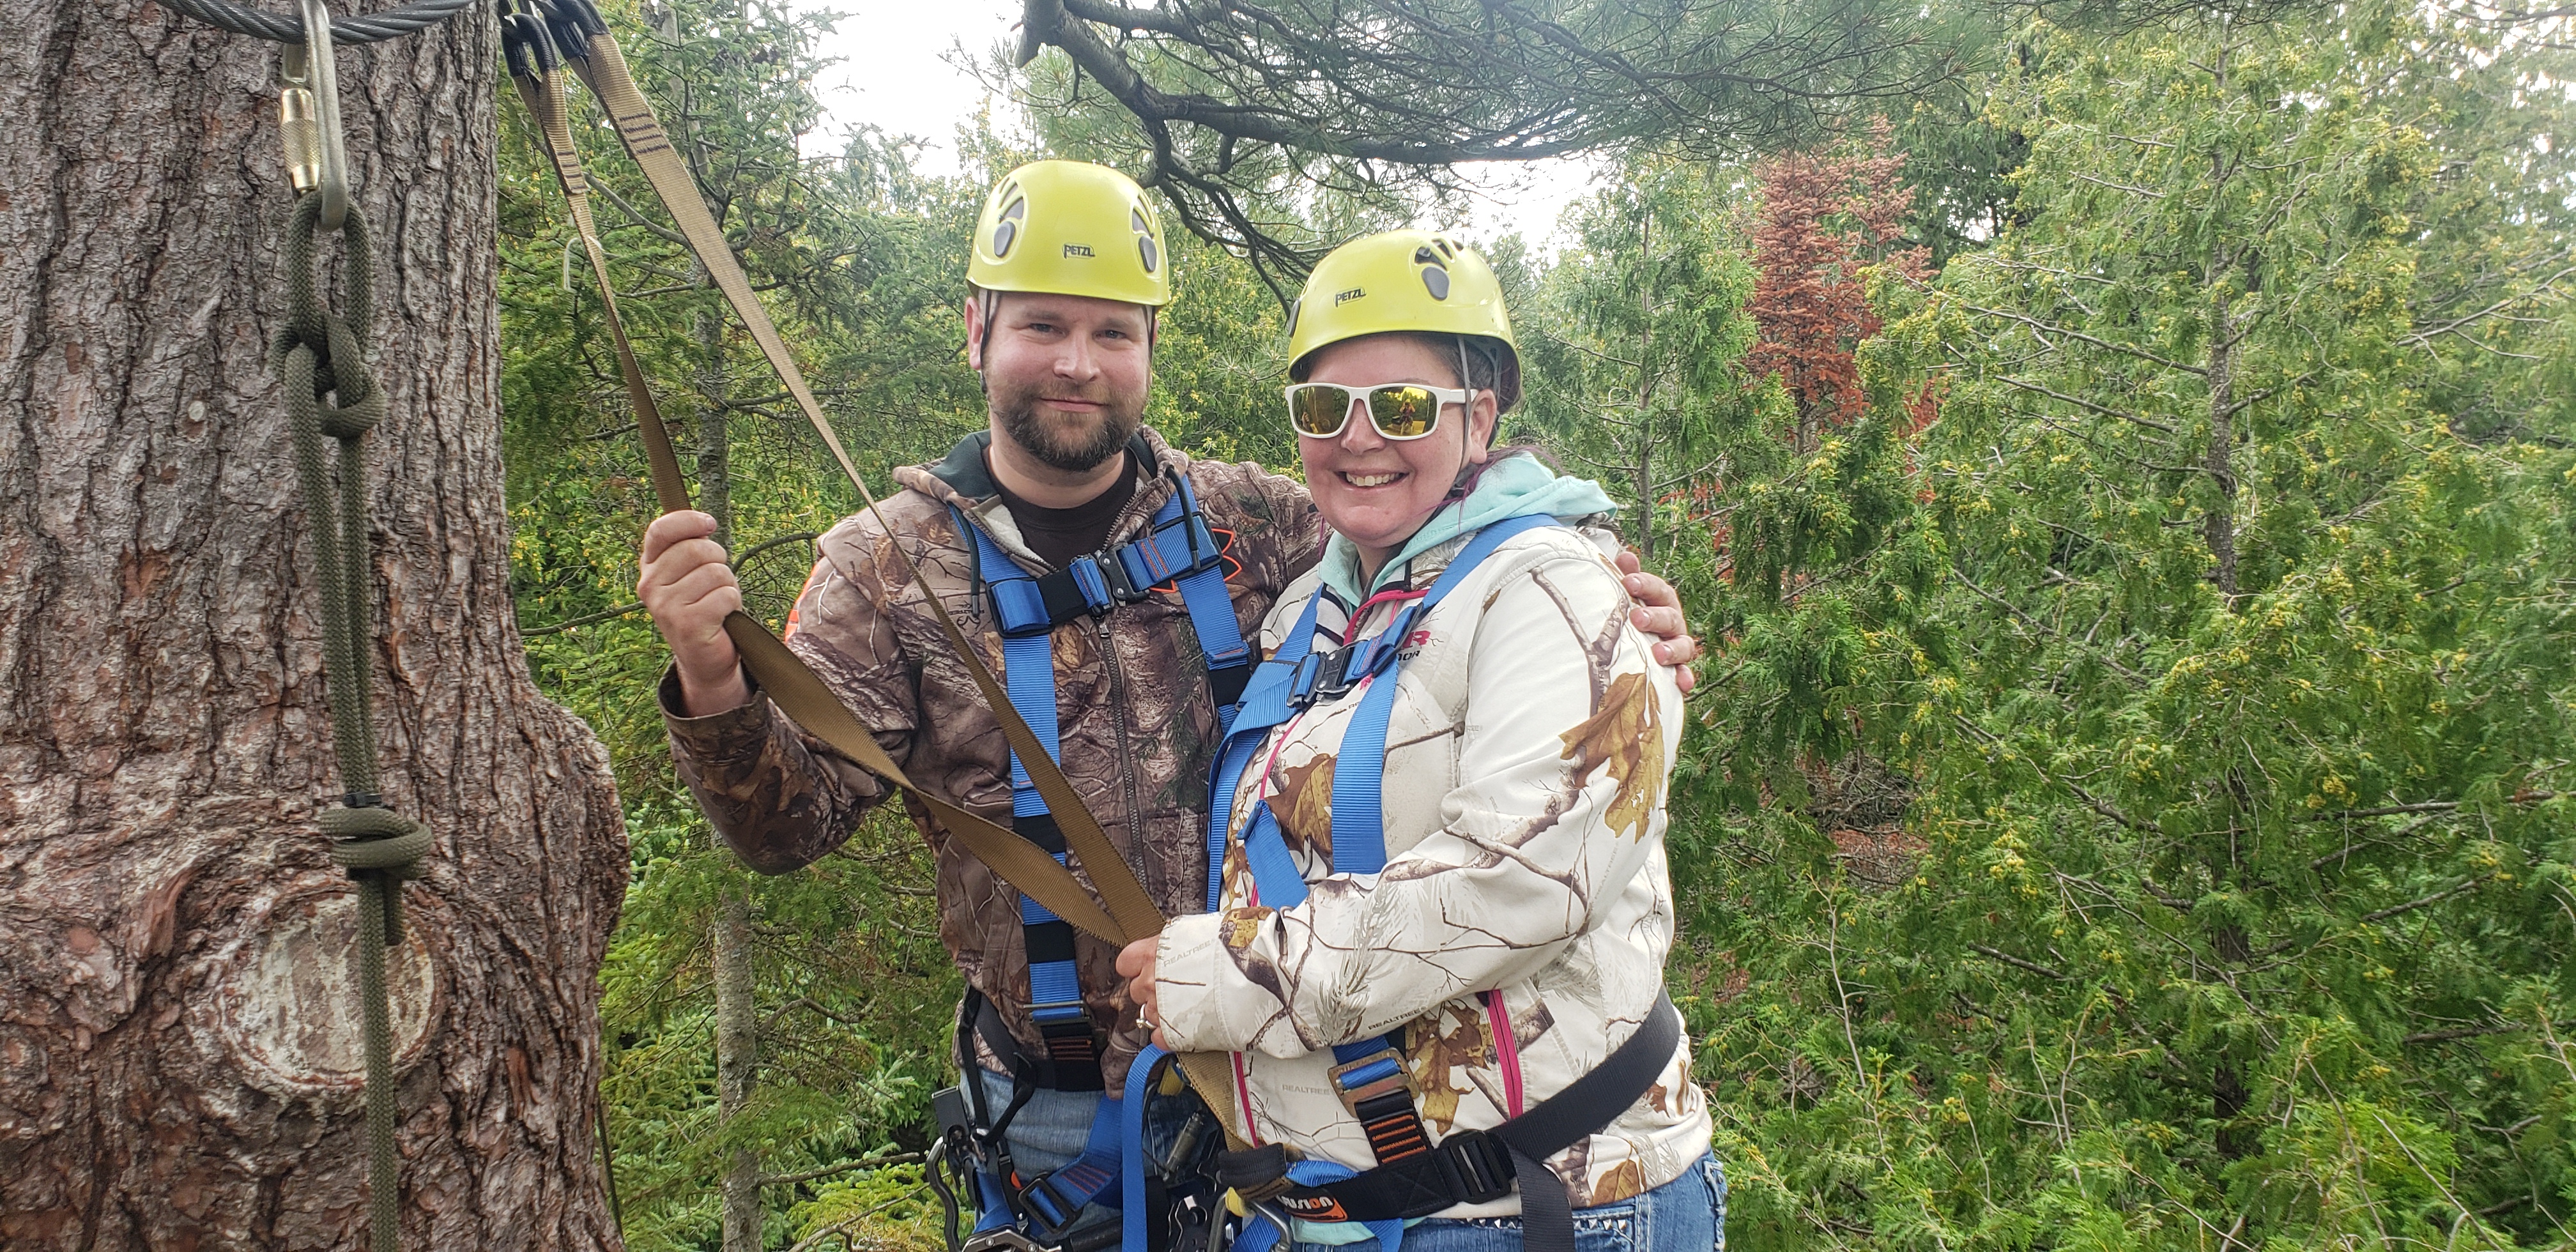 couple ziplining in wisconsin forests